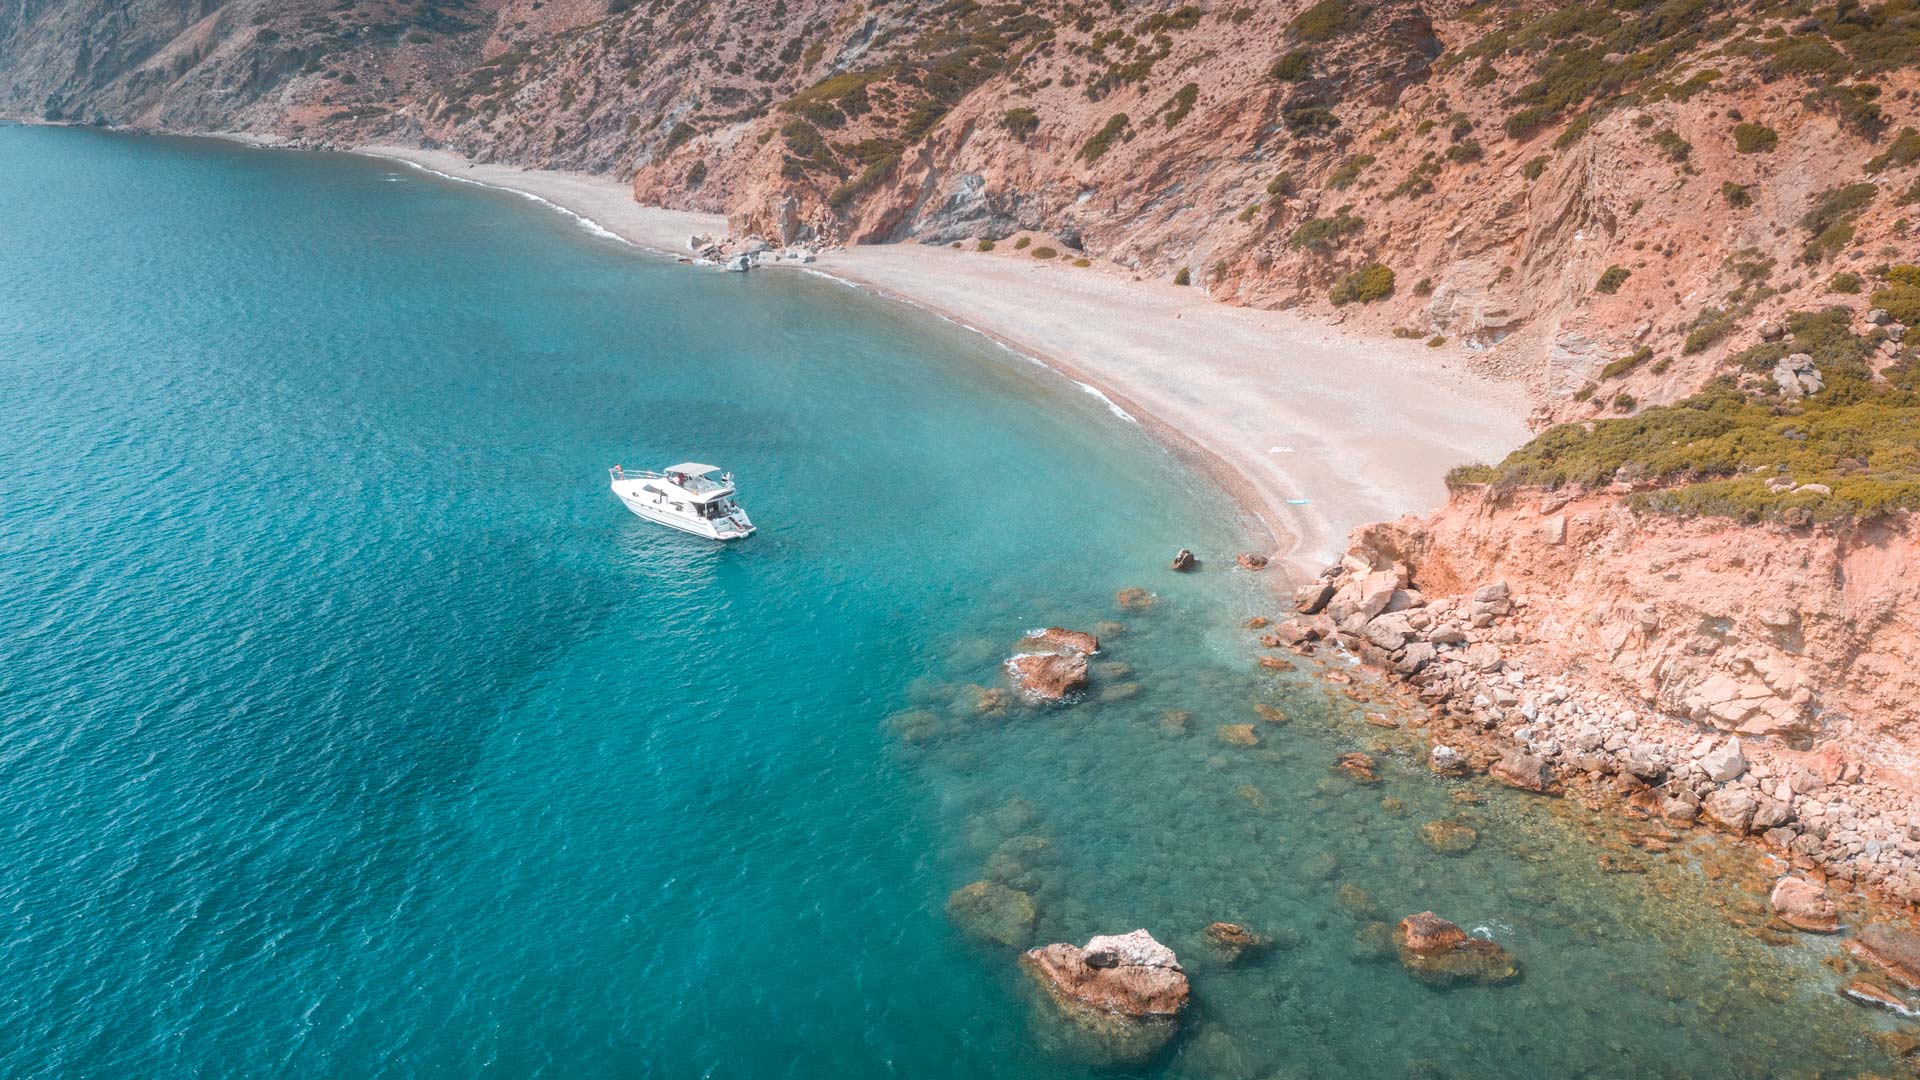 With virtually the entire southern coastline of Kos covered in beaches, there’s only one way to find your favourite